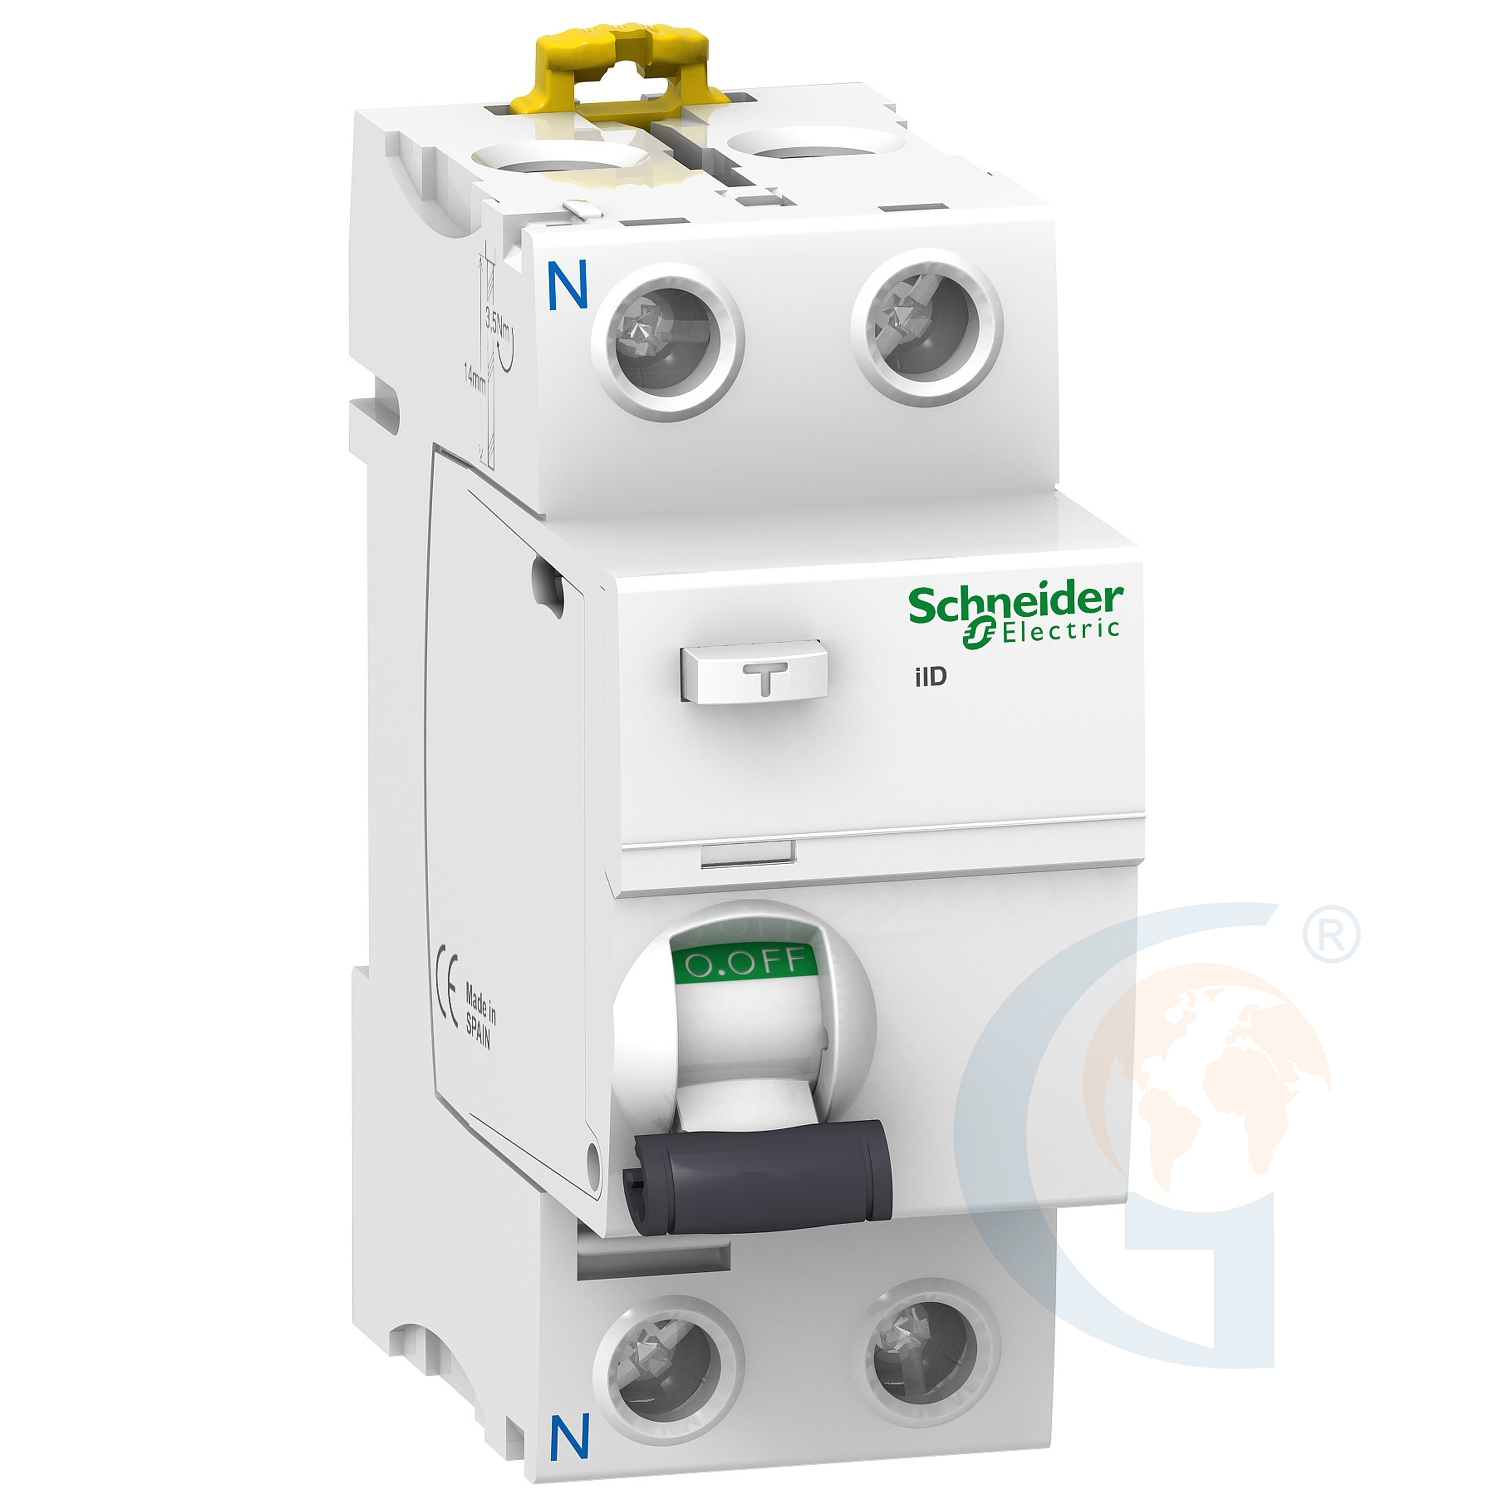 Schneider Electric A9R20216 ACTI 9 IID – RCCB – 2P – 16A – 10MA – TYPE A https://gesrepair.com/wp-content/uploads/2020/Schneider/Schneider_Electric_A9R20216_.jpg